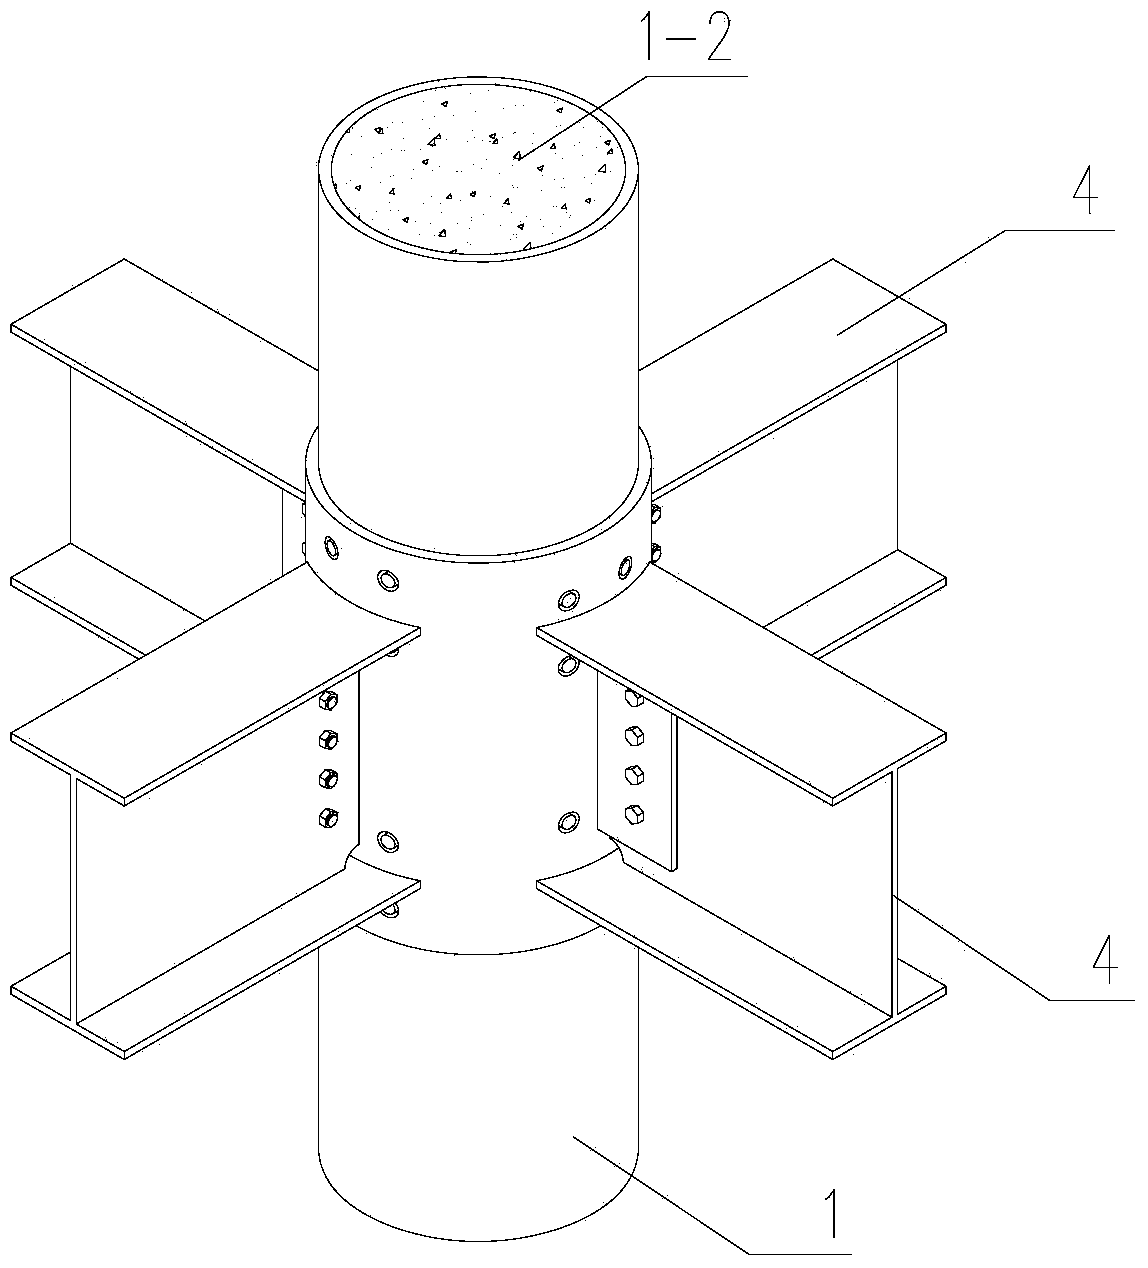 Connection joint of concrete filled steel tubular column and beams